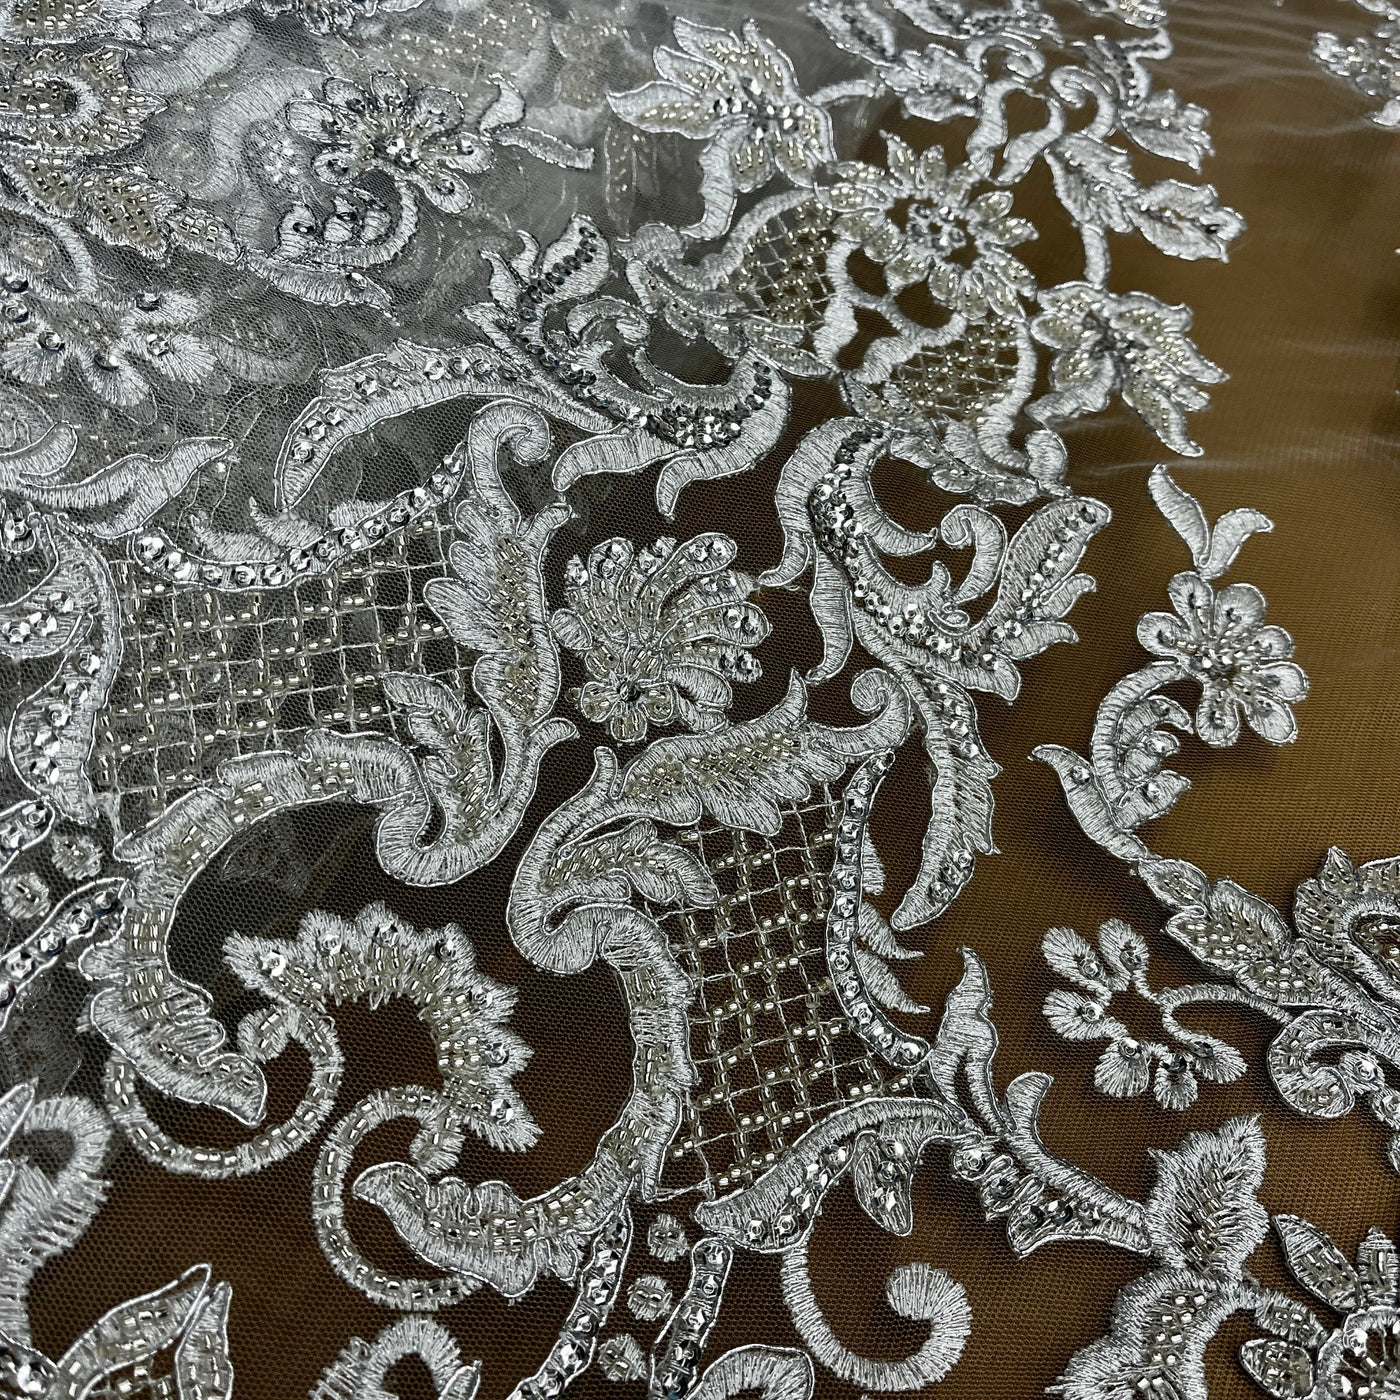 Beaded & Corded Bridal Lace Fabric Embroidered on 100% Polyester Net Mesh | Lace USA - 96997W-HB